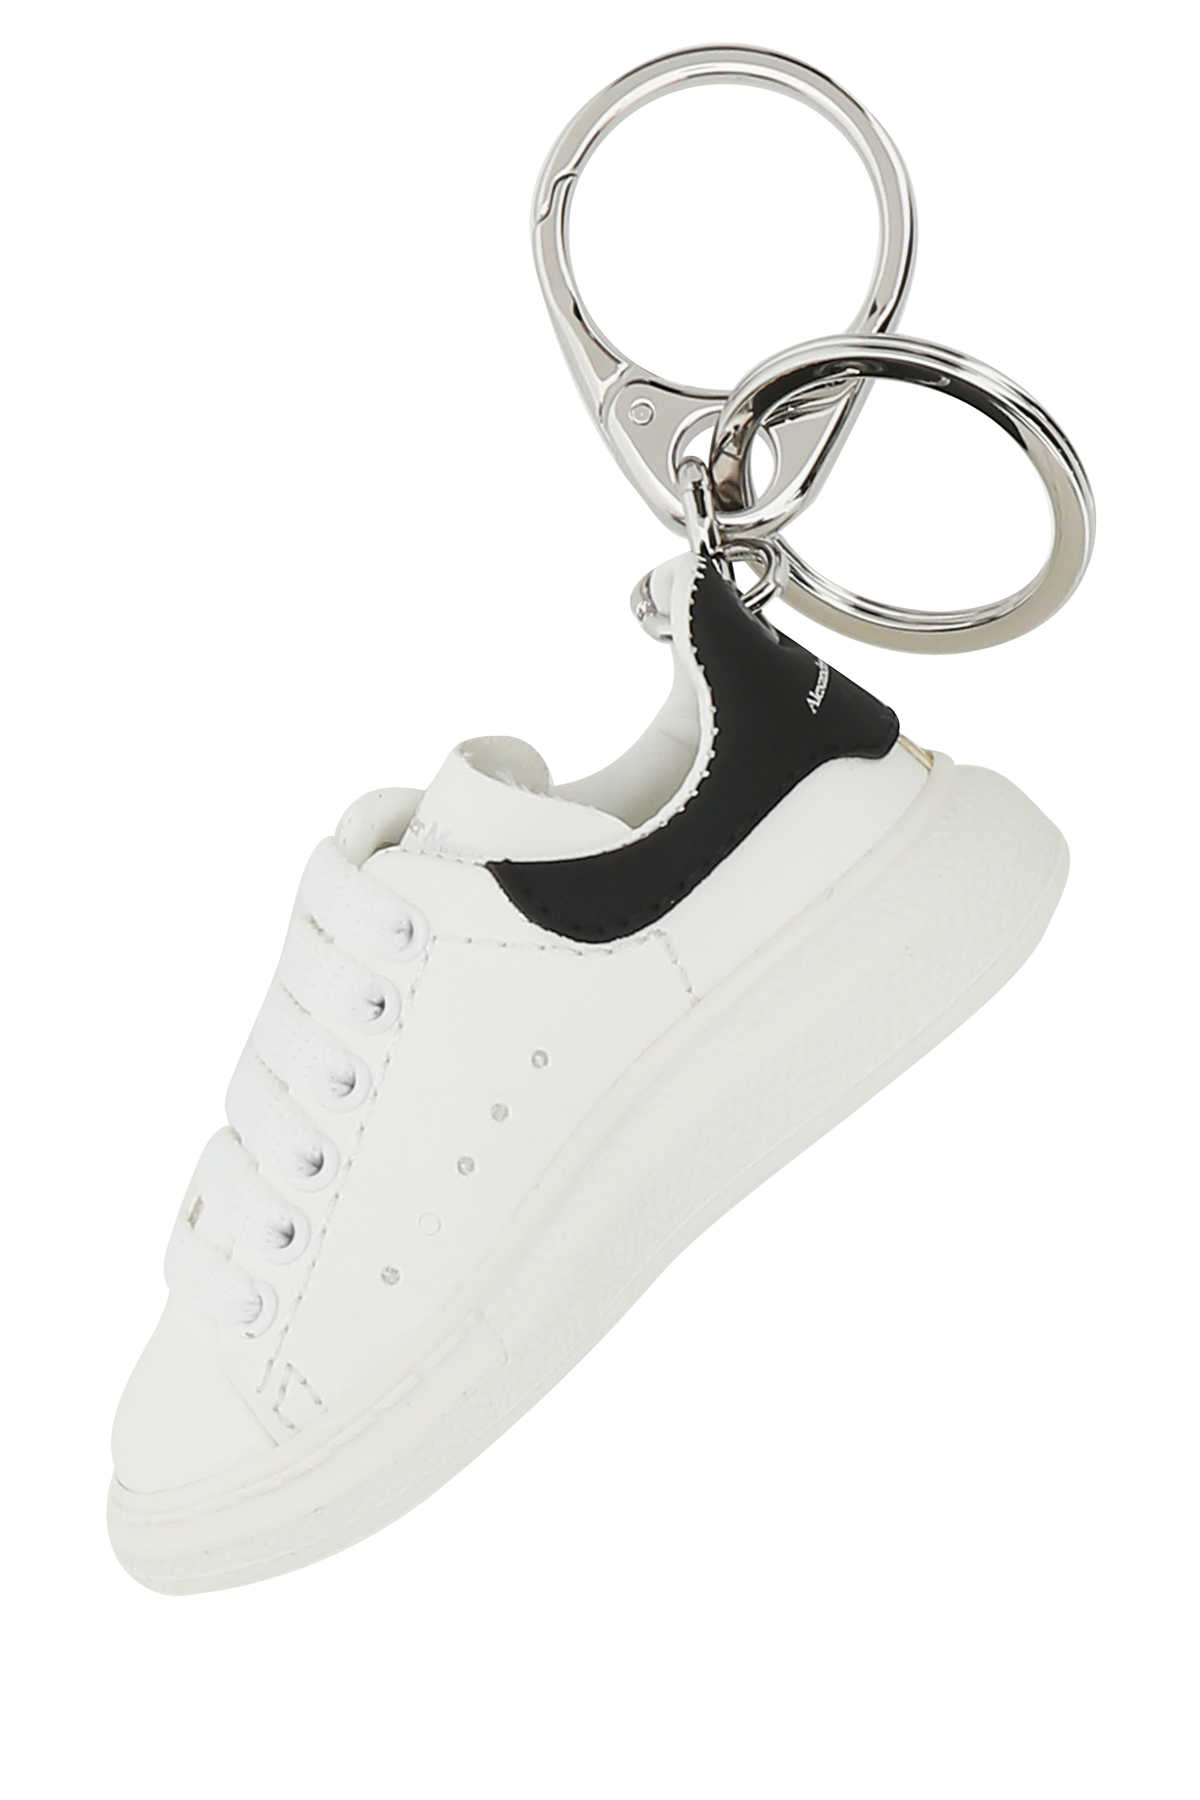 ALEXANDER MCQUEEN WHITE LEATHER KEY RING